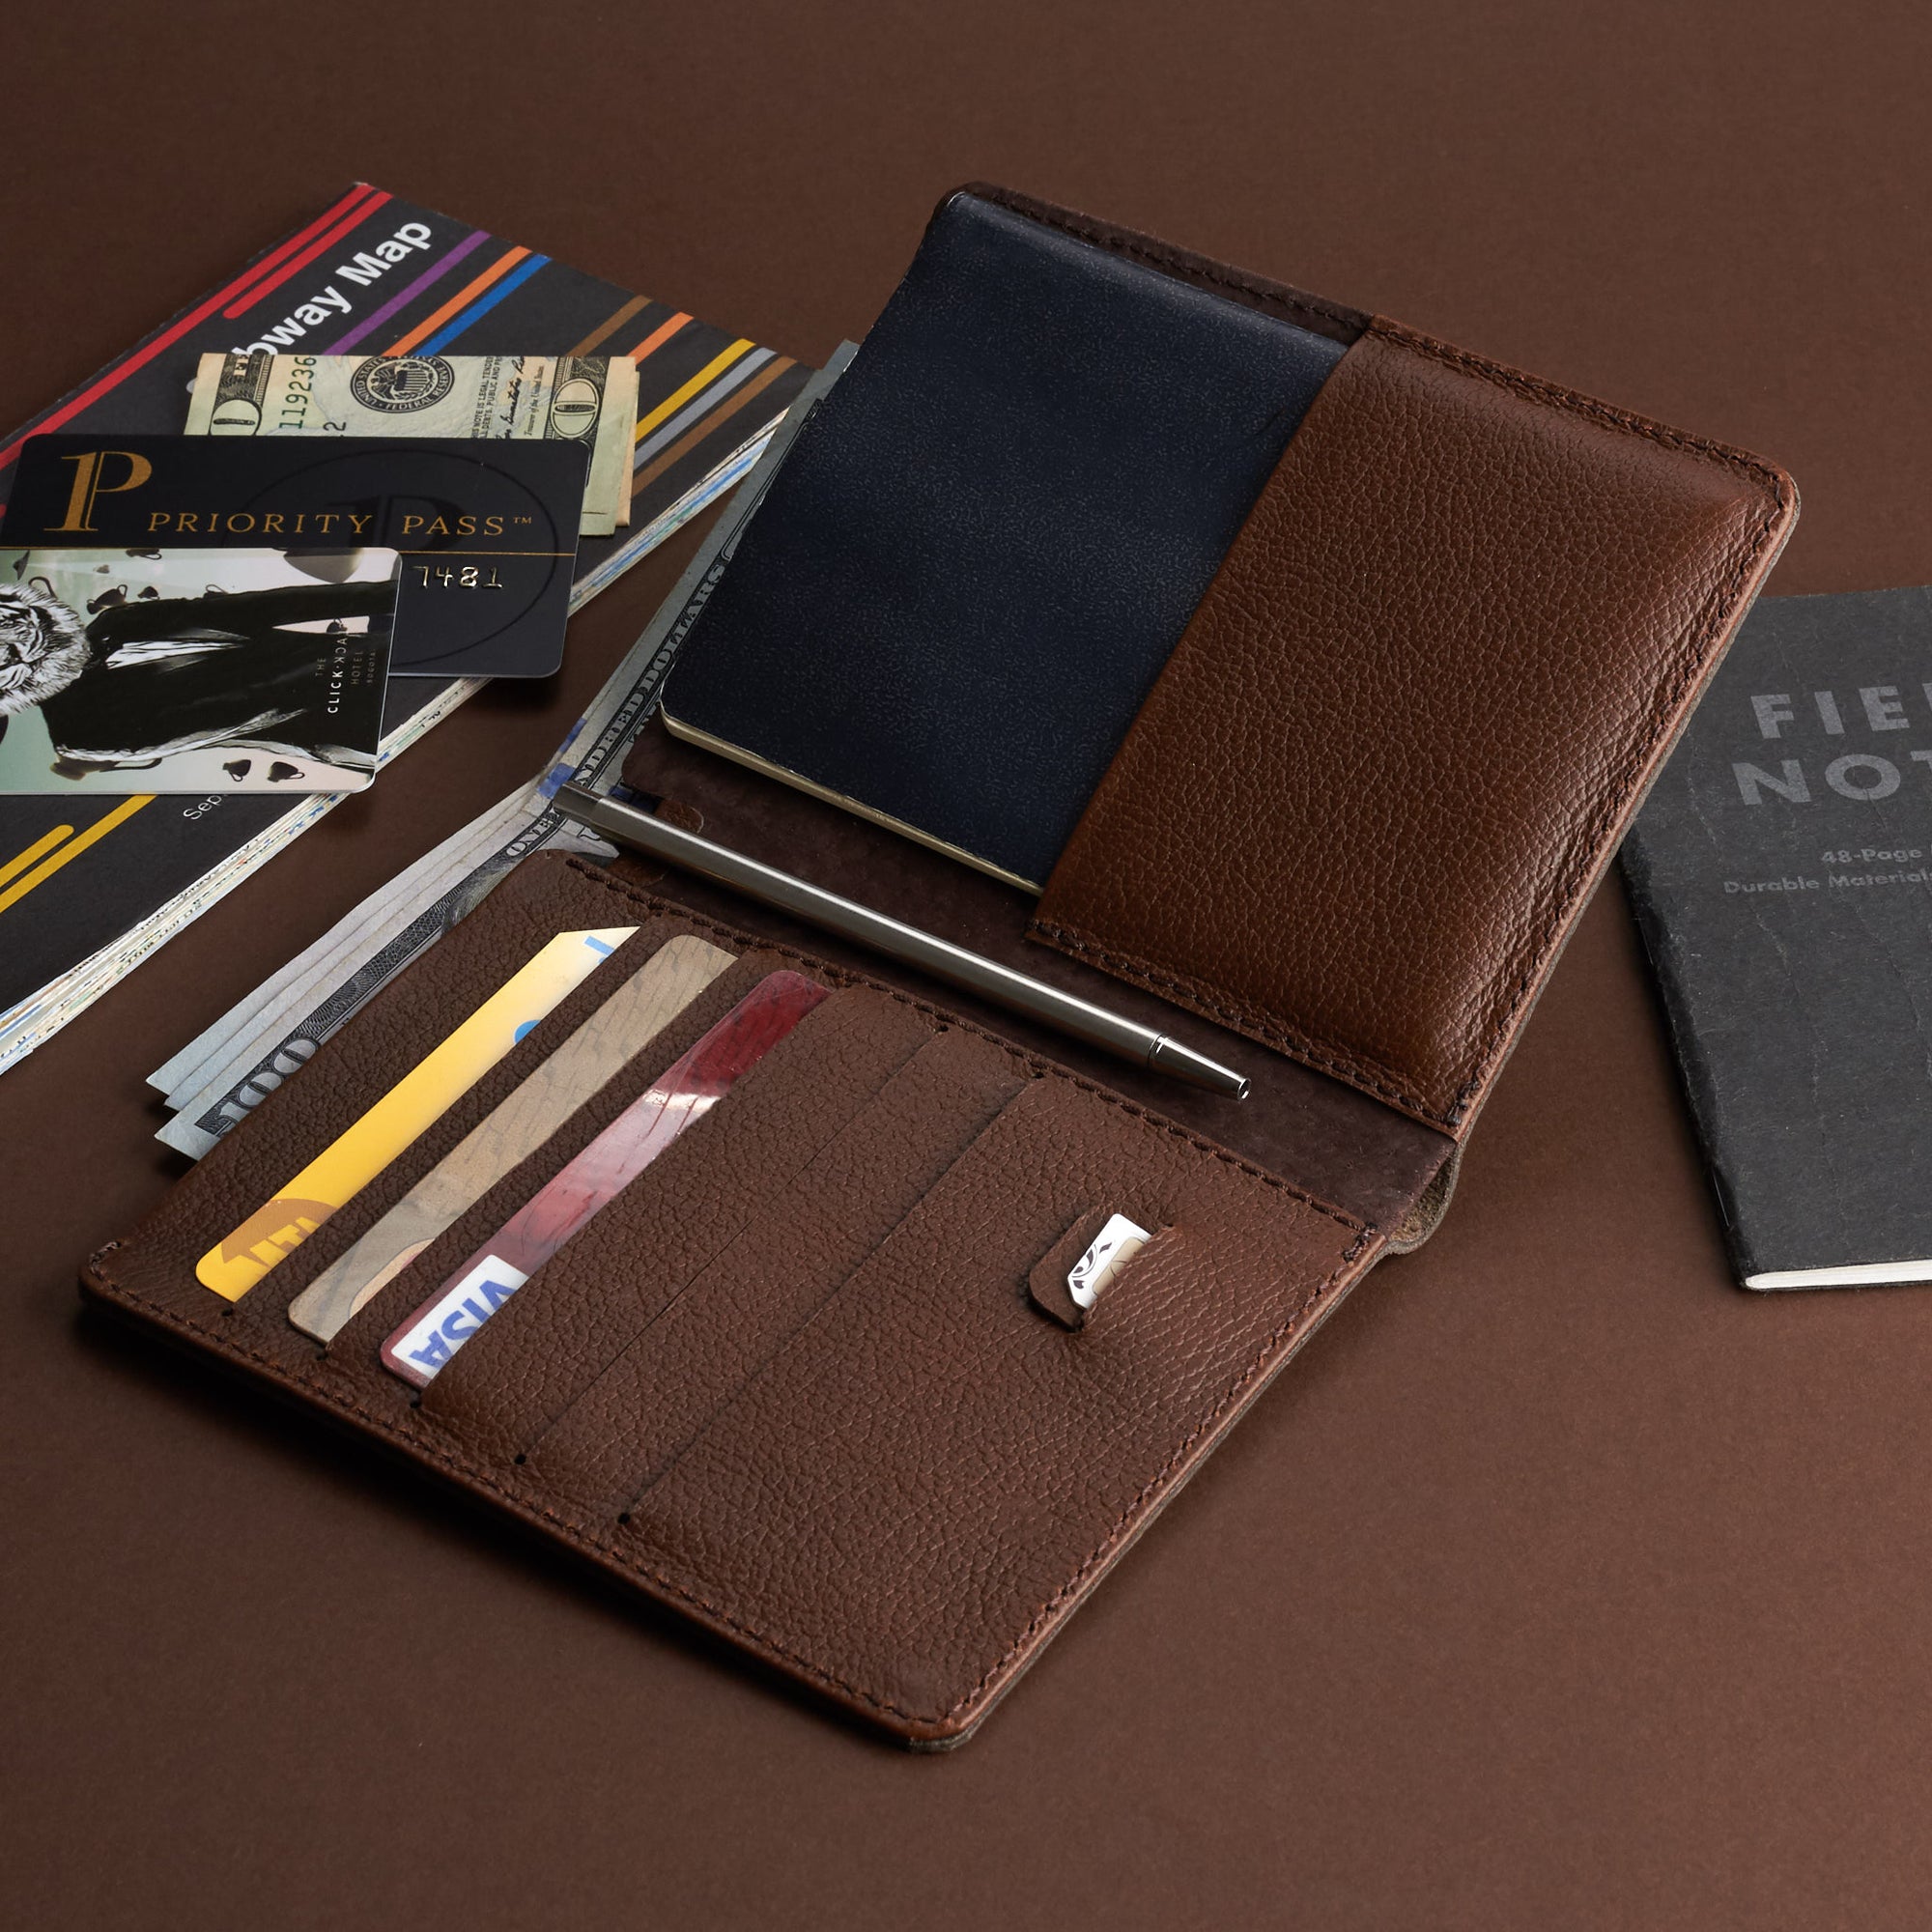 Easy access to cards. Pocket Passport Holder Travel Wallet Brown by Capra Leather